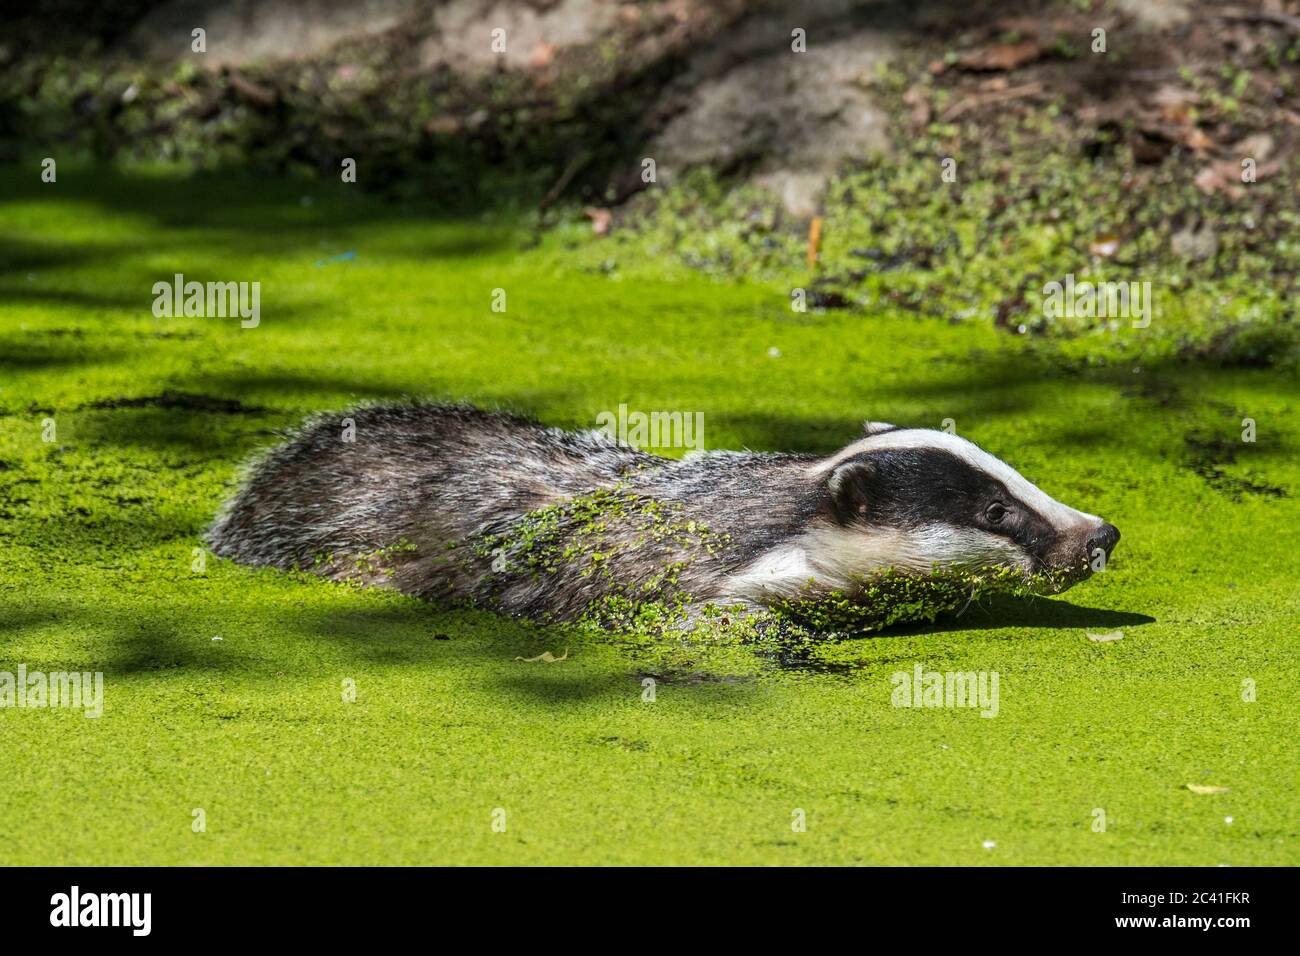 European badger (Meles meles) swimming in water of pond / pool covered in duckweed Stock Photo